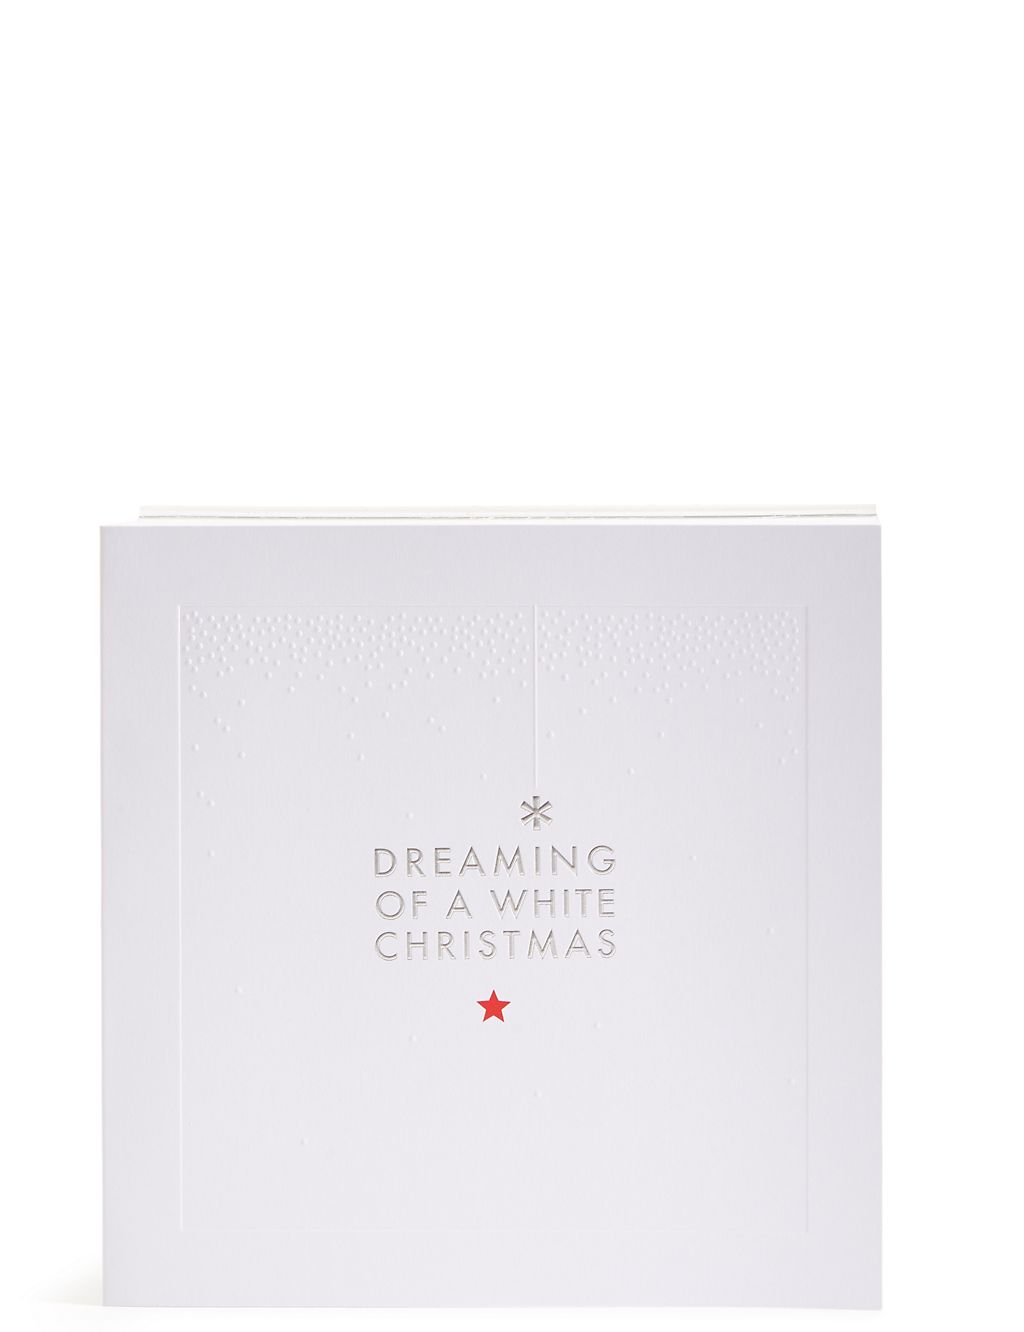 Dreaming of a White Christmas Charity Cards Pack of 20 1 of 4